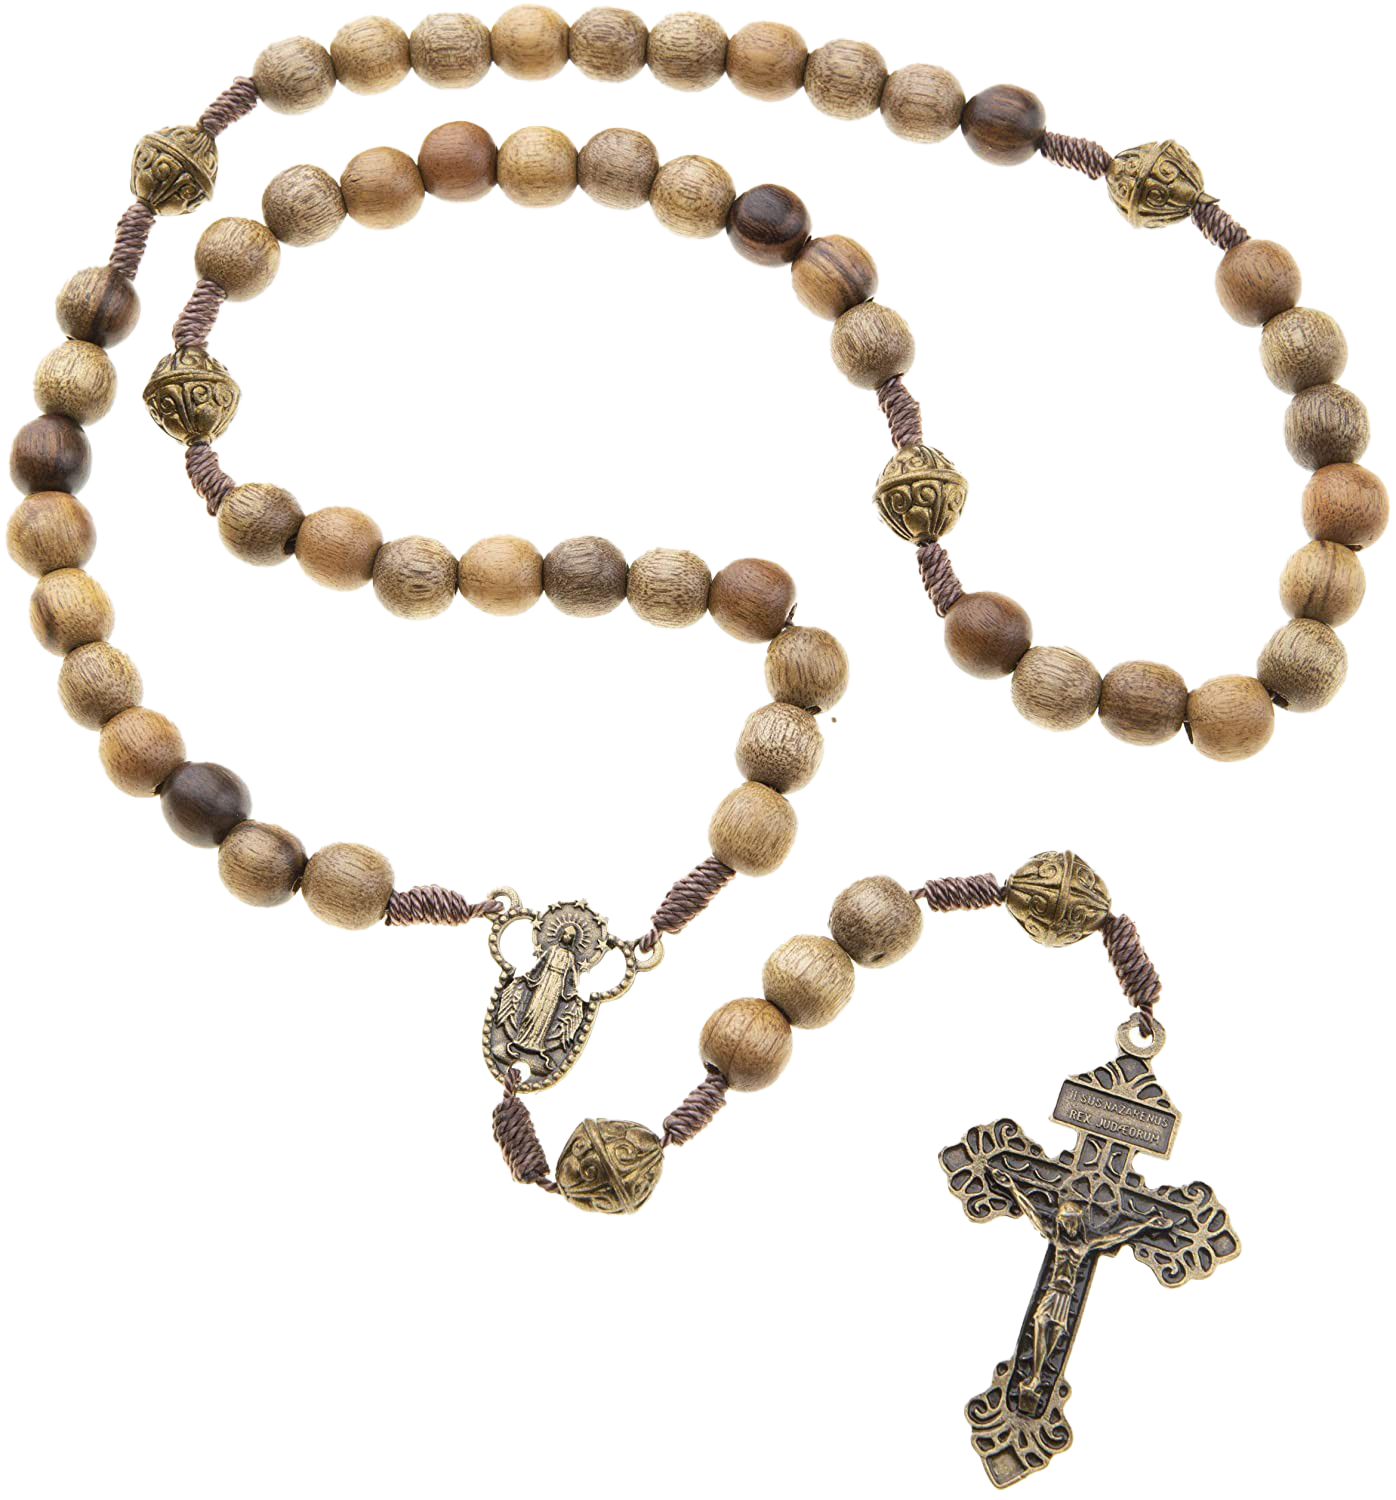 Download PNG image - Rosary Beads PNG High-Quality Image 